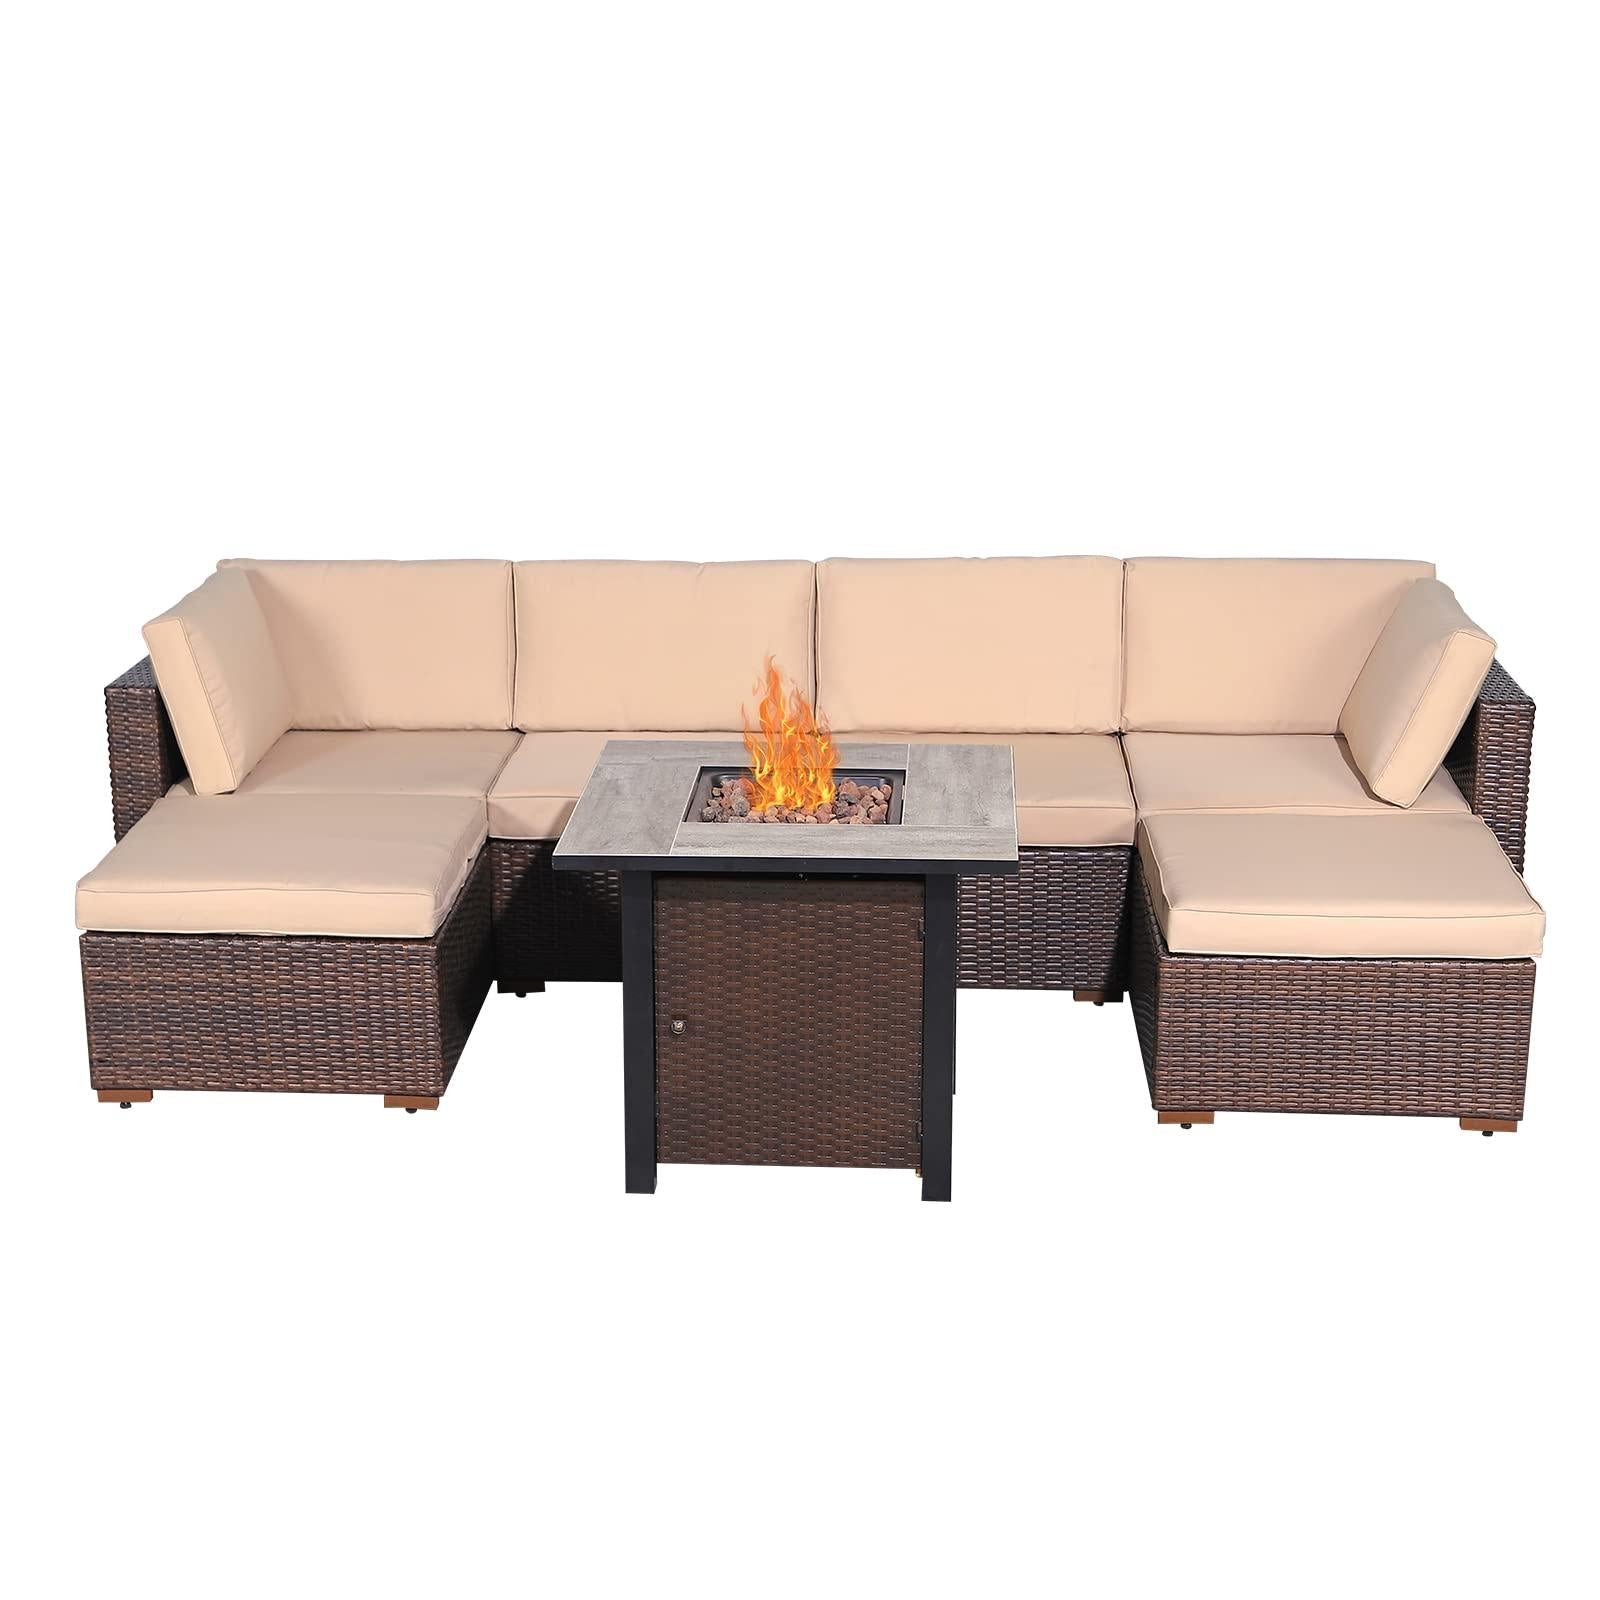 7-pc. Patio Furniture Set with Gas Fire Pit Table, and Ottomans, Wicker Design price